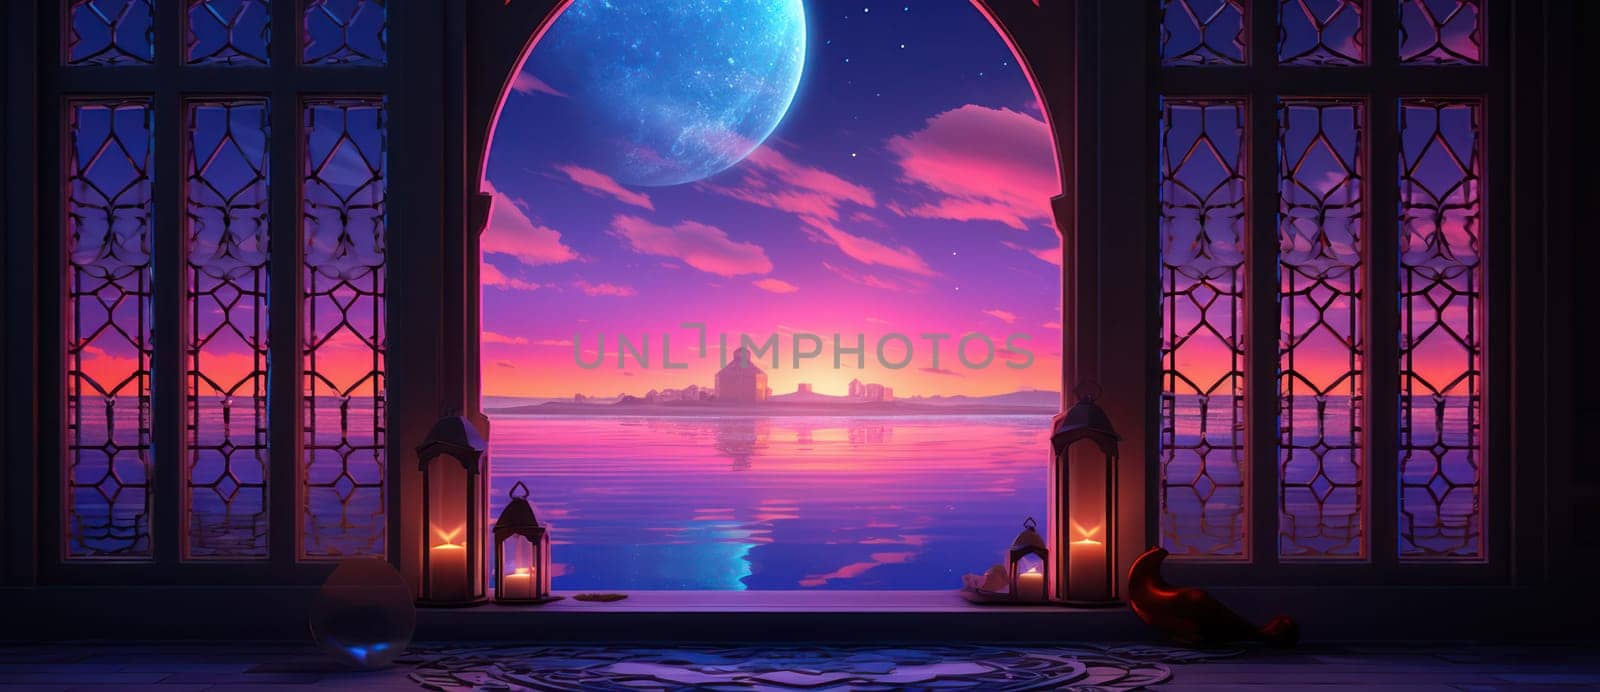 Moonlit Tranquility: A Serene Night Sky Reflecting on a Calm Ocean